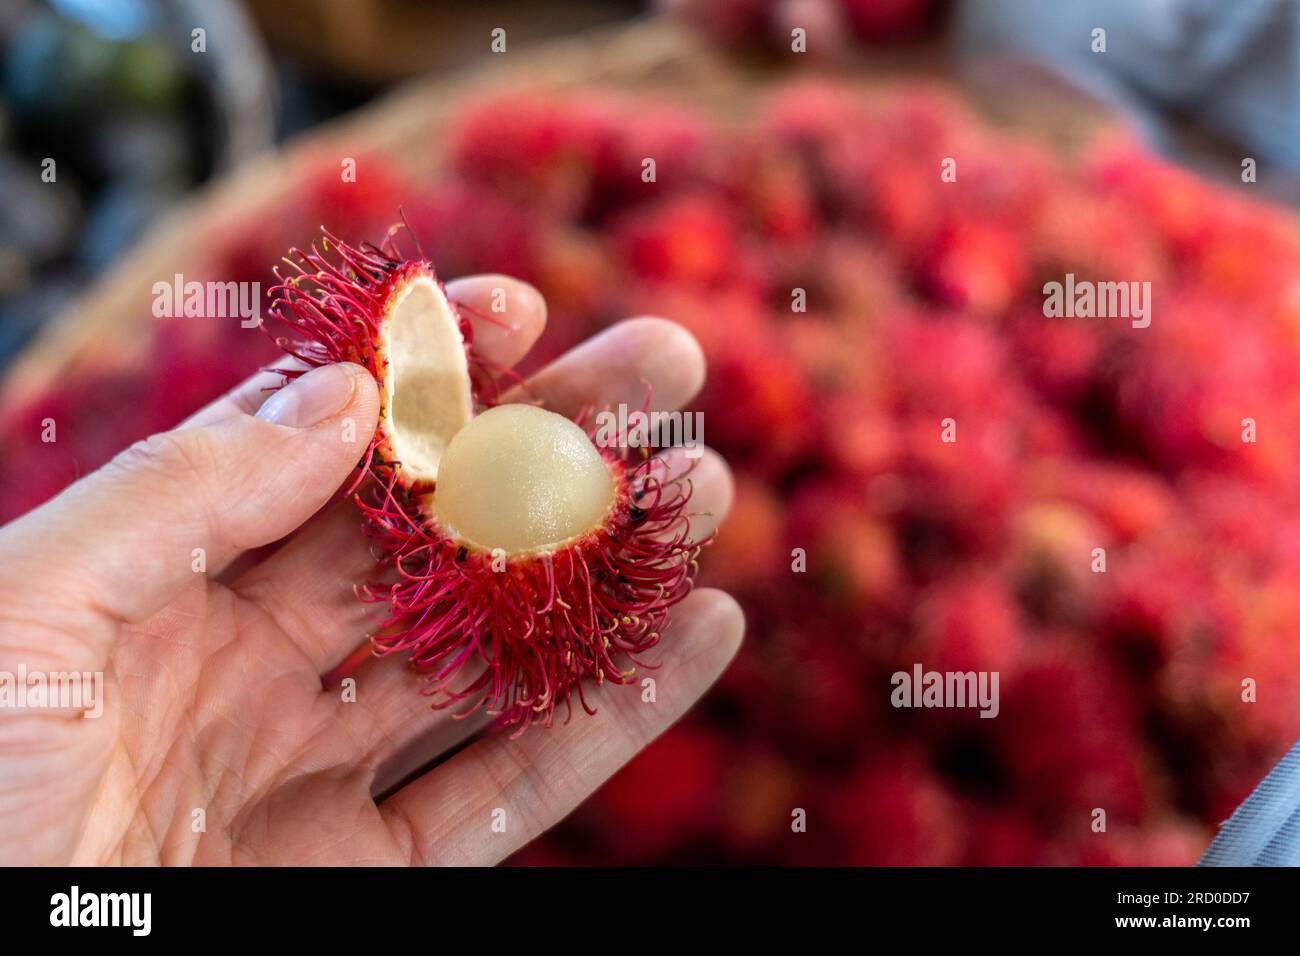 Close Up of a Ripe Rambutan (Nephelium lappaceum) A Fruit Native to Southeast Asia in a White Hand by a Stall in the Colorful Market 'Mercado Mayoreo' Stock Photo